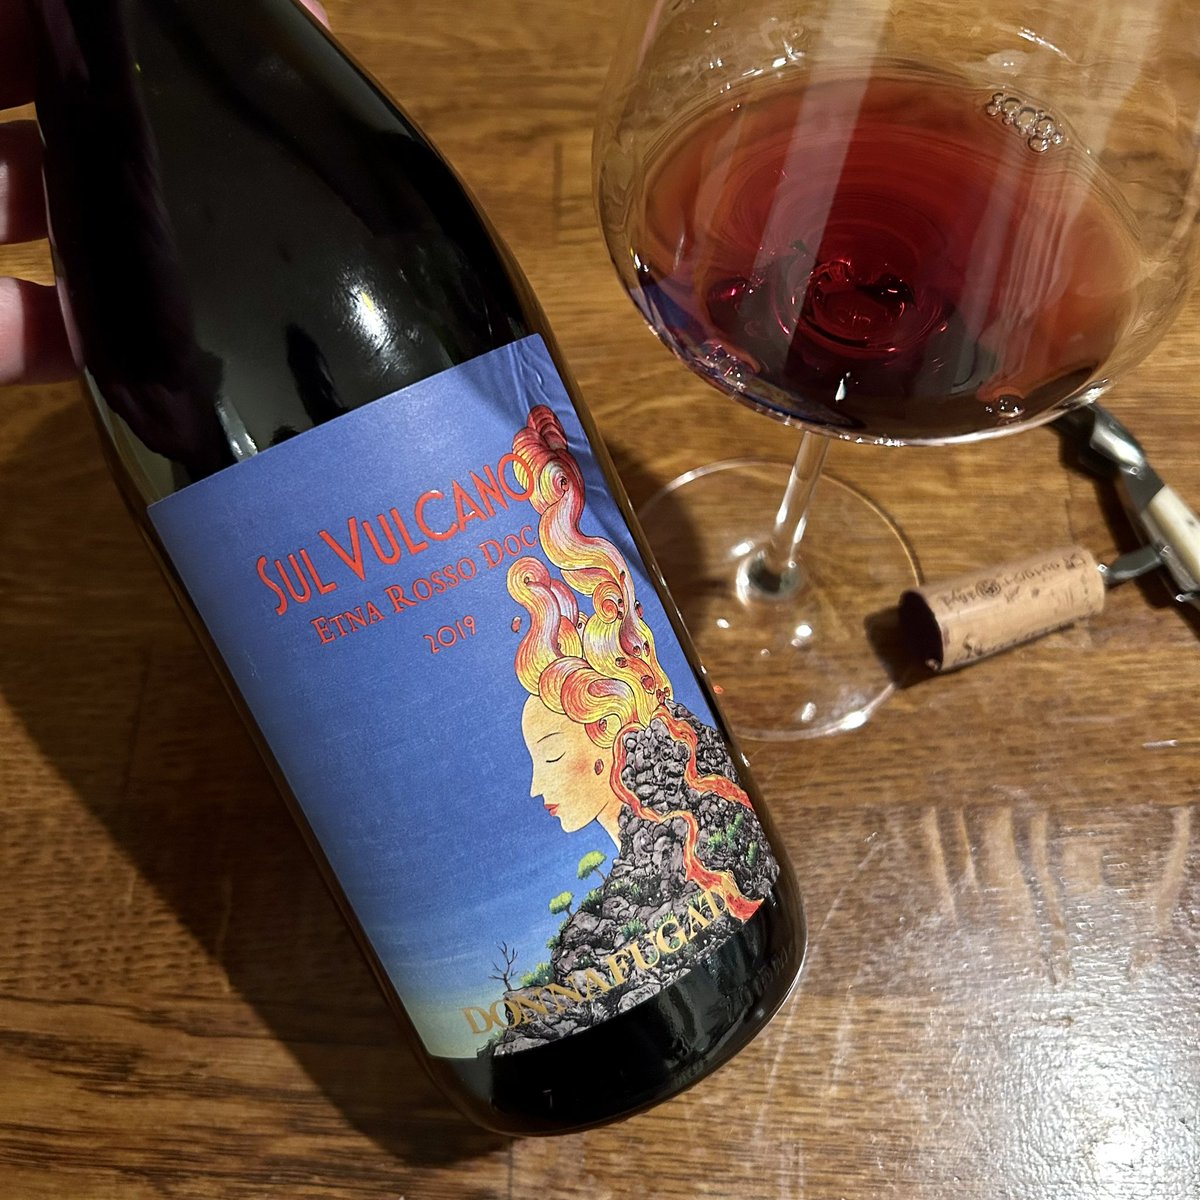 This is my first taste of Donna Fugata's #Etna wine, and I love it! Super light and silky with all the power and structure dissimulated in the acidity of the wine. Burst of forest fruits with delicate herby, minty notes answering to deep balsamic, mushroomy notes. #Sicily